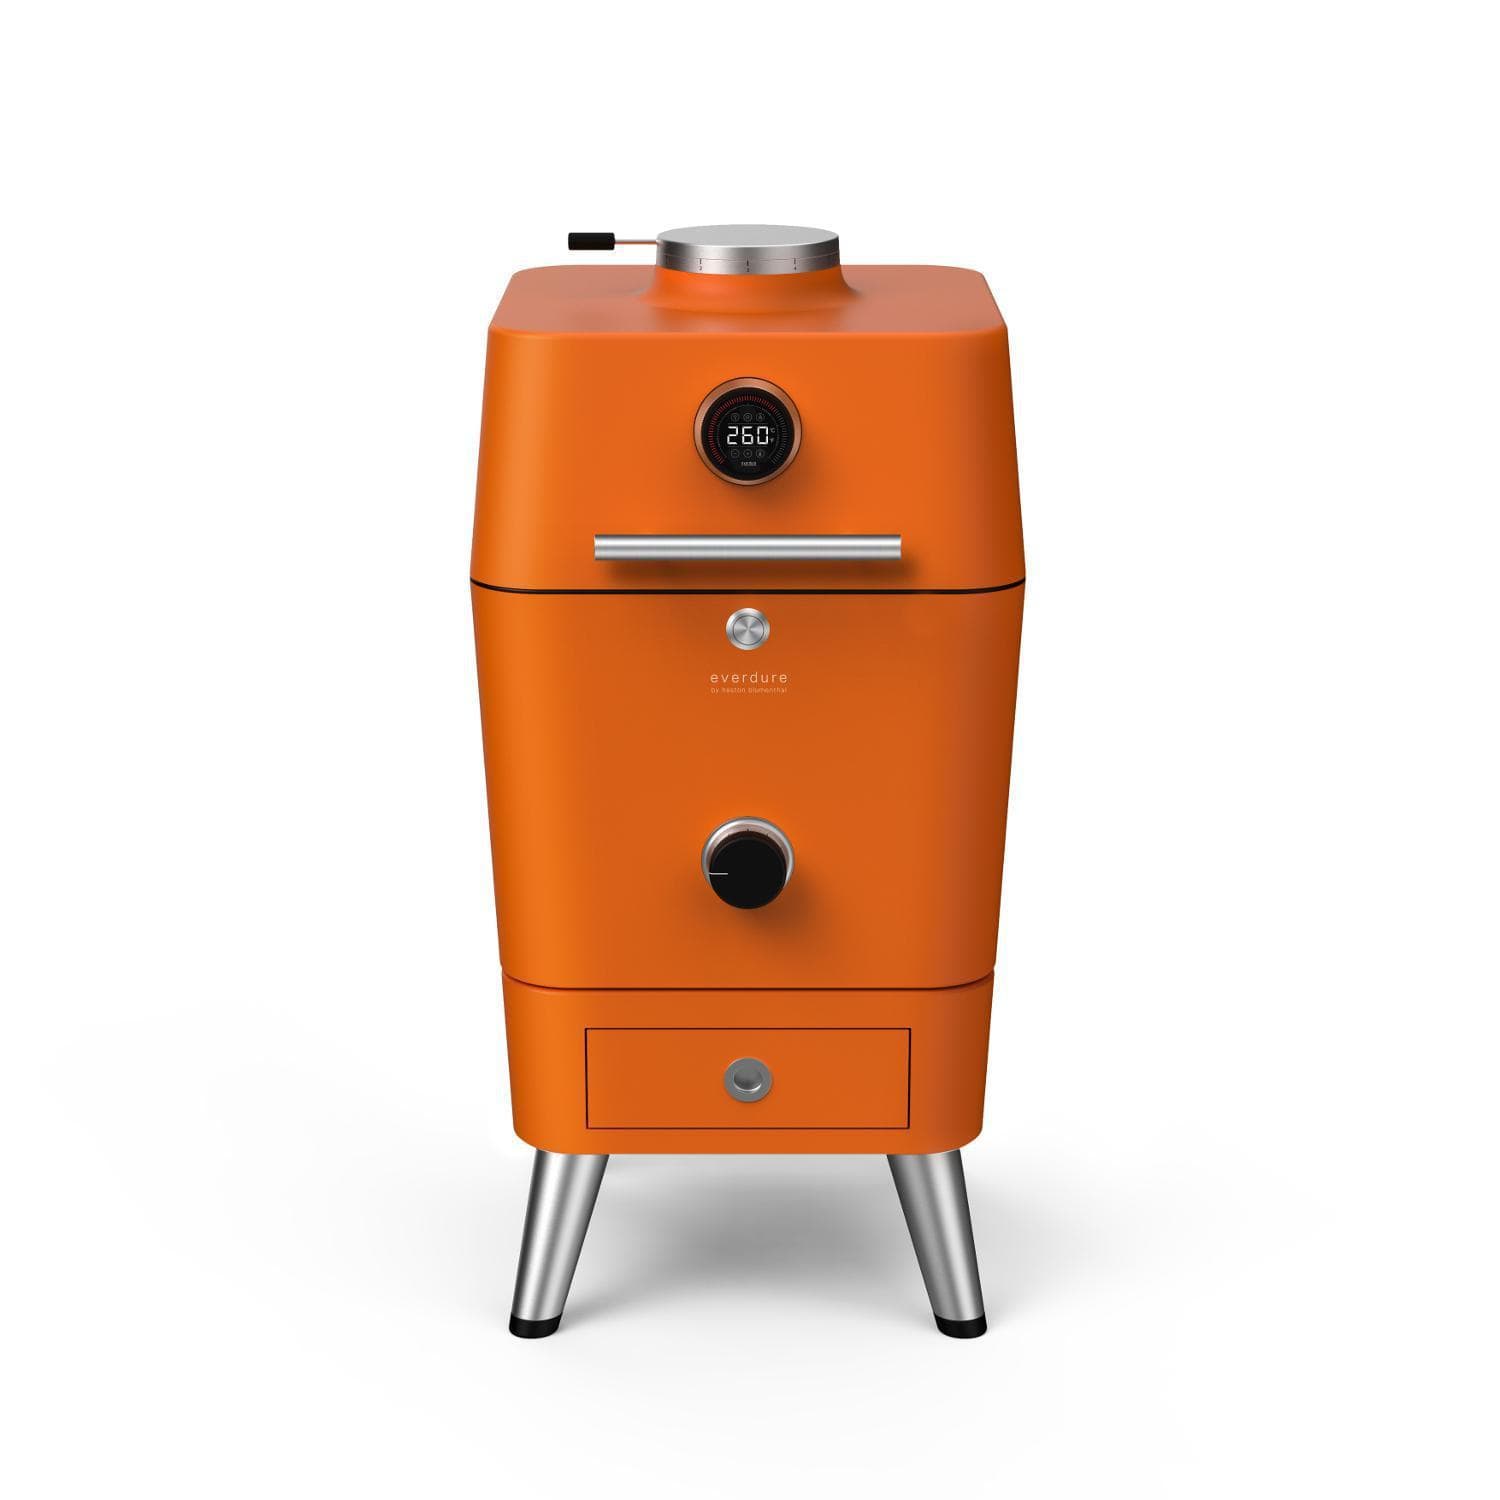 Everdure Charcoal Grill Orange Everdure By Heston Blumenthal 4K 21-Inch Charcoal Grill & Smoker